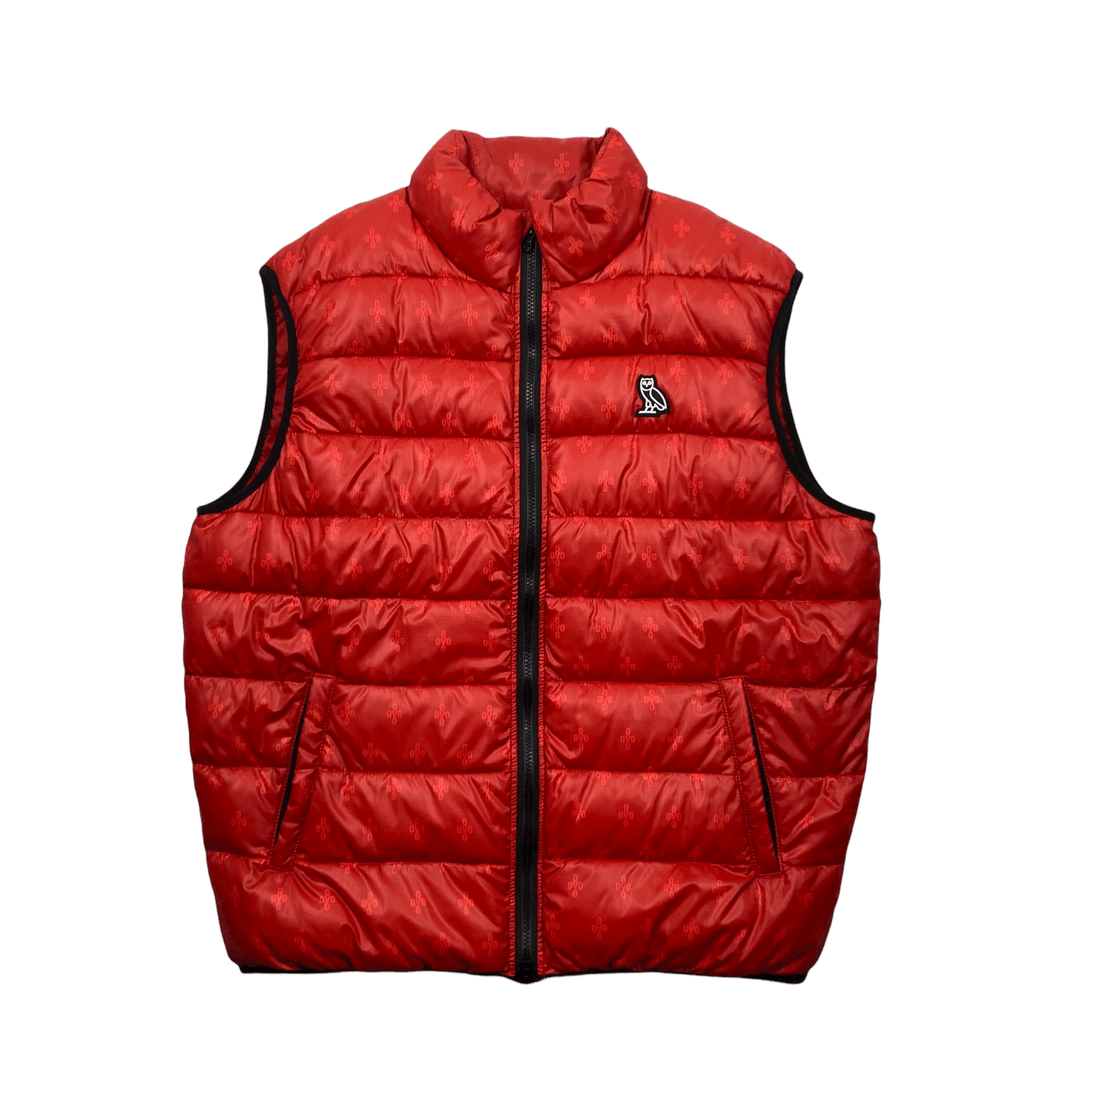 Red October's Very Own (OVO) Puffer Gilet - Extra Large - The Streetwear Studio